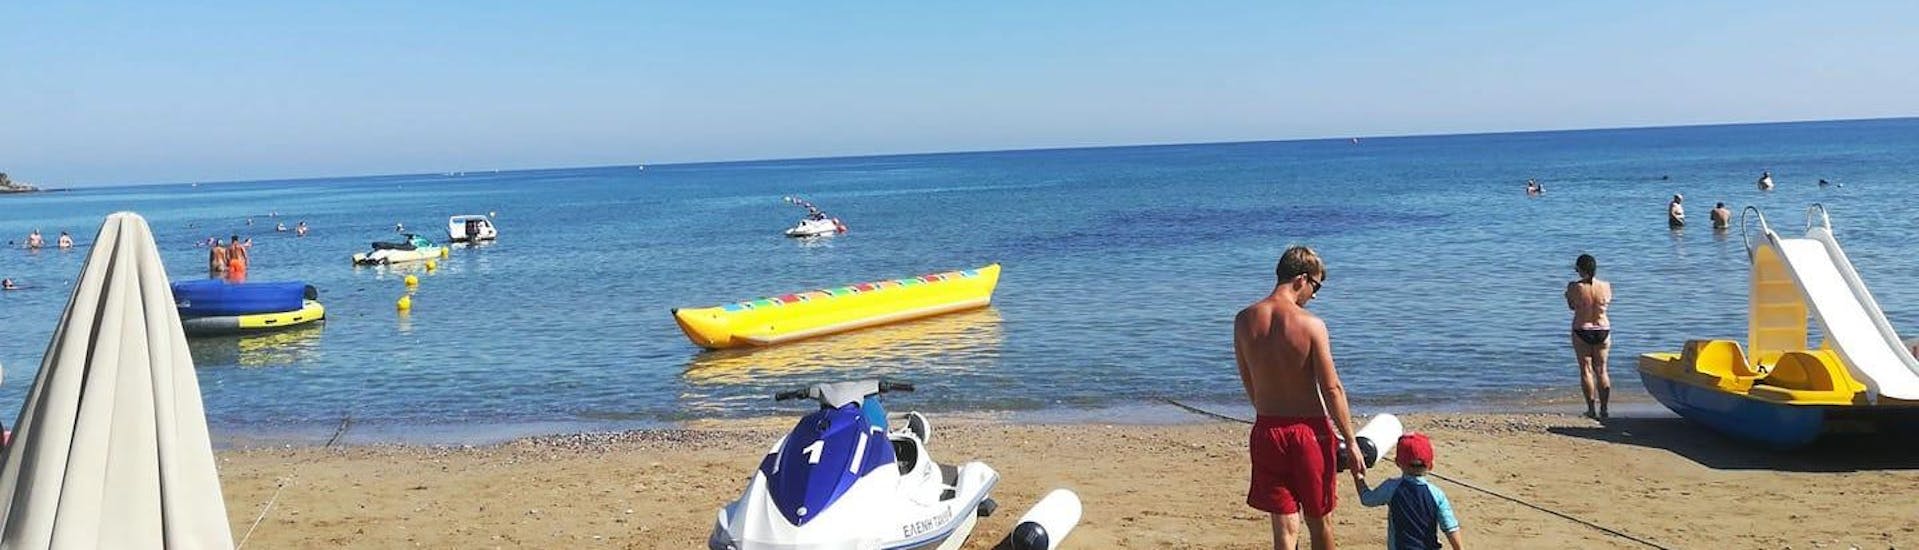 Beach of Stalida, where Slalom Water Sports offers its water sports activities.